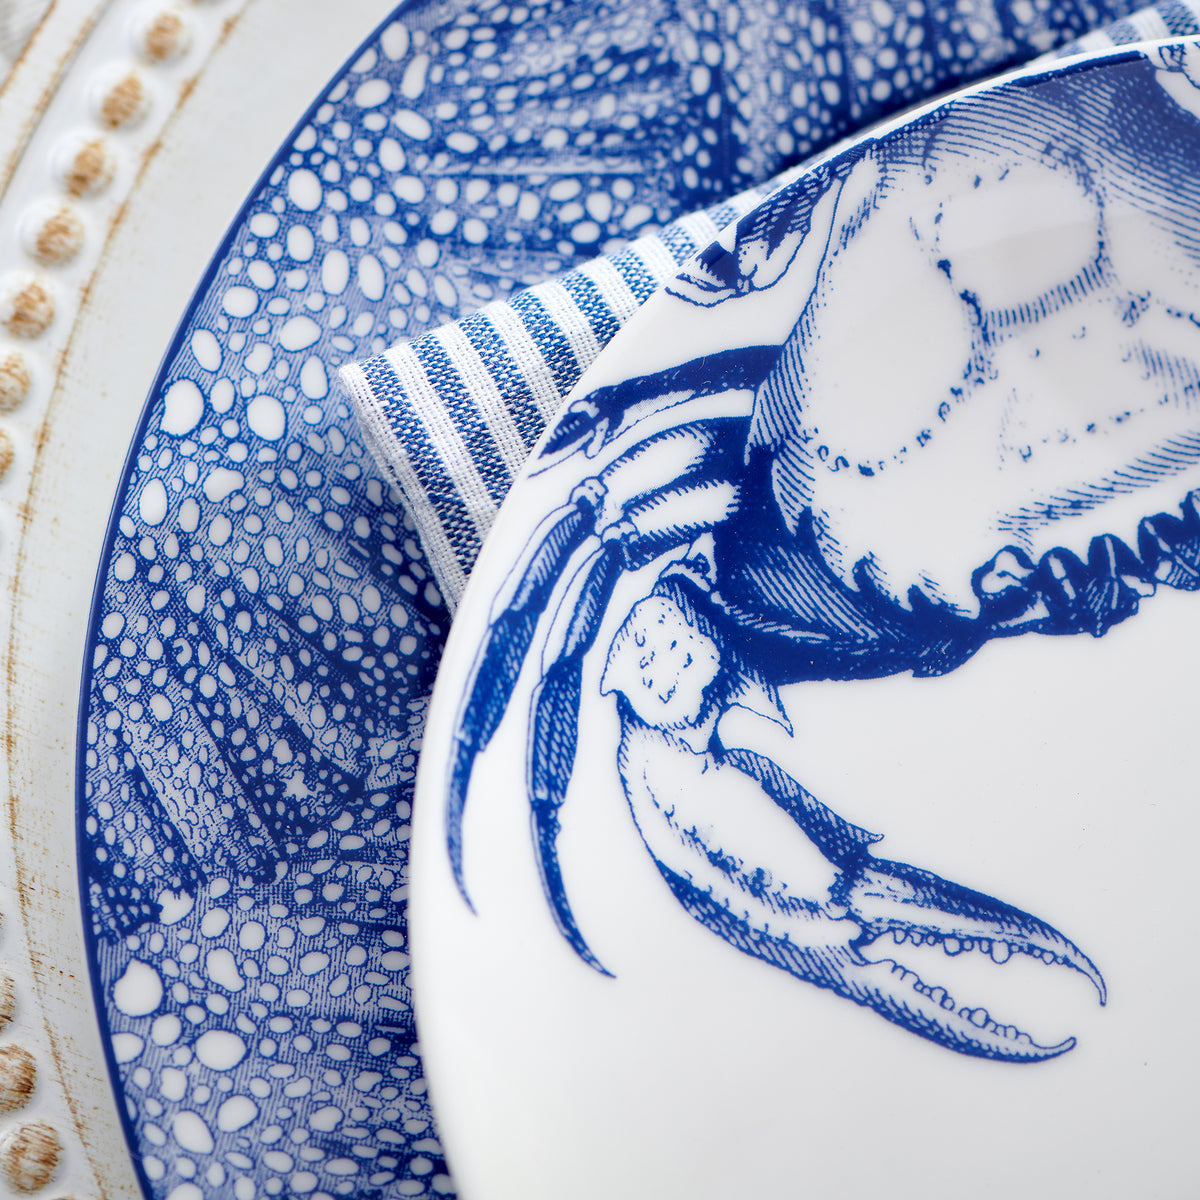 A Crab Blue Canapé Plate from Caskata Artisanal Home, perfect for a seaside vibe.